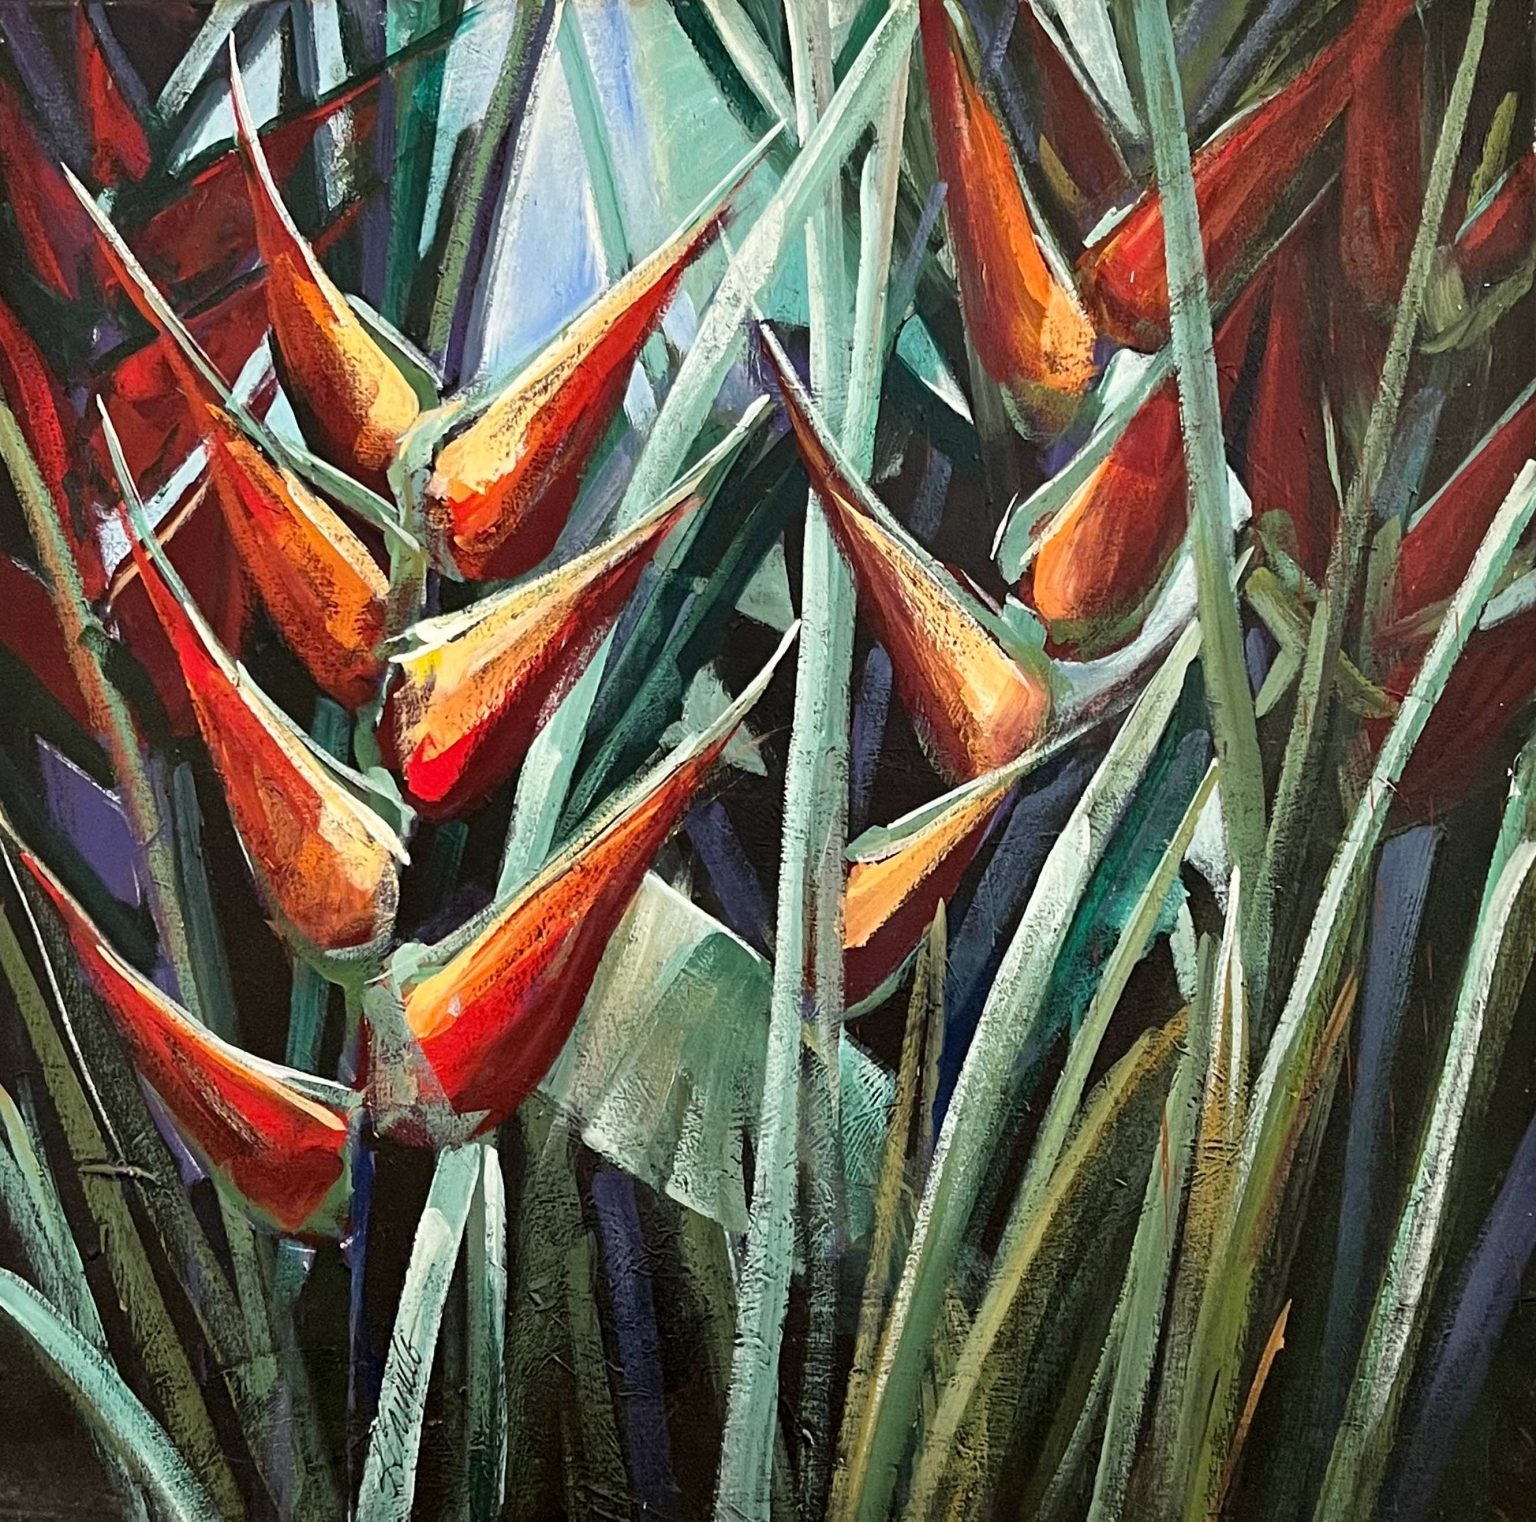 Painting of Tropical Haliconias